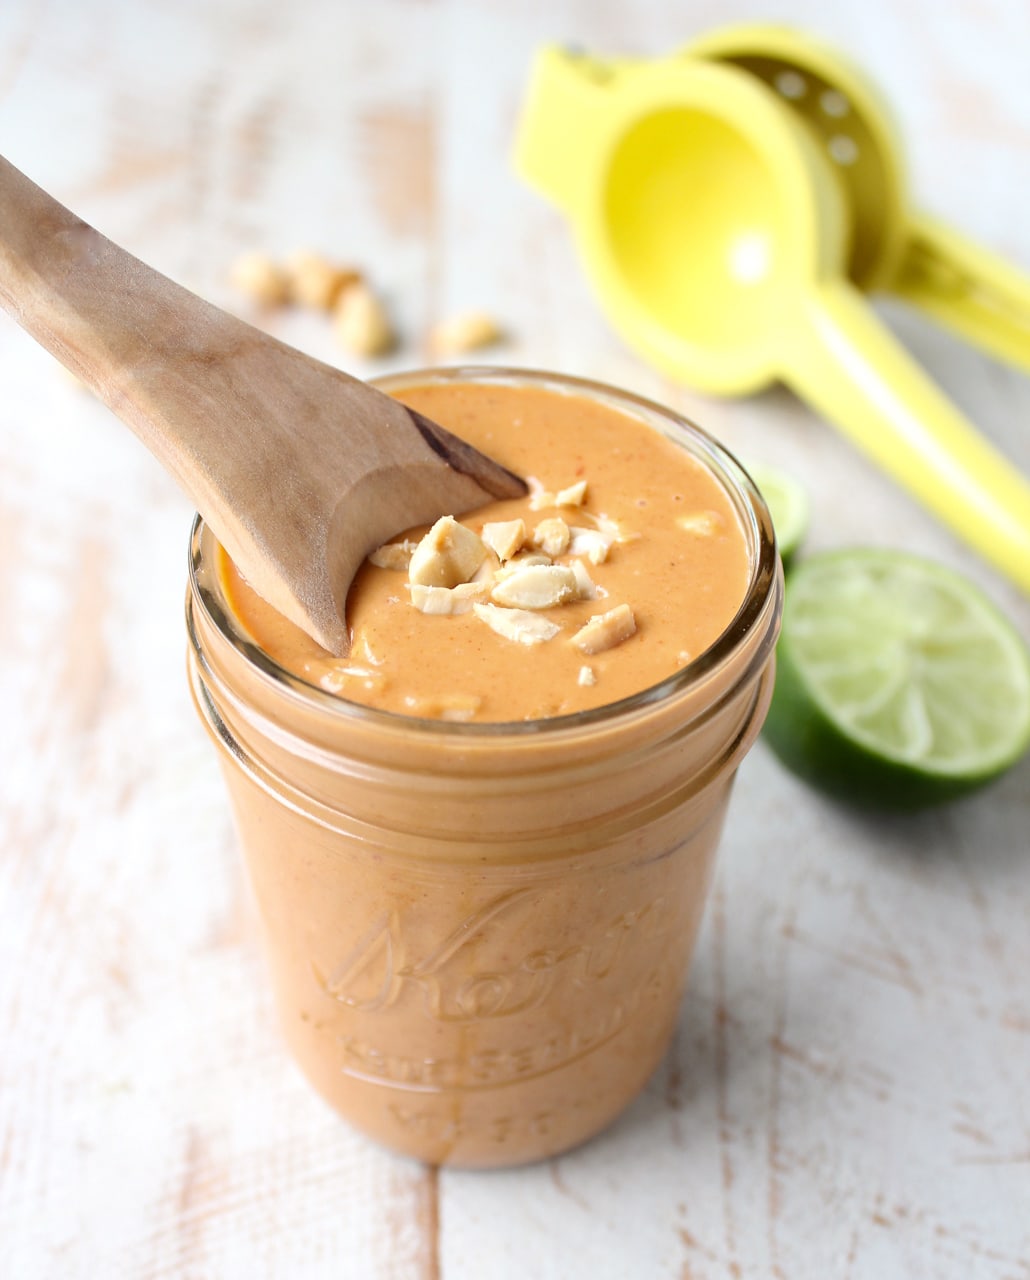 Whether you drizzle it over buddha bowls, add it to pizza or toss it with noodles, this easy 10 minute Thai Peanut Sauce recipe is sure to be a hit!